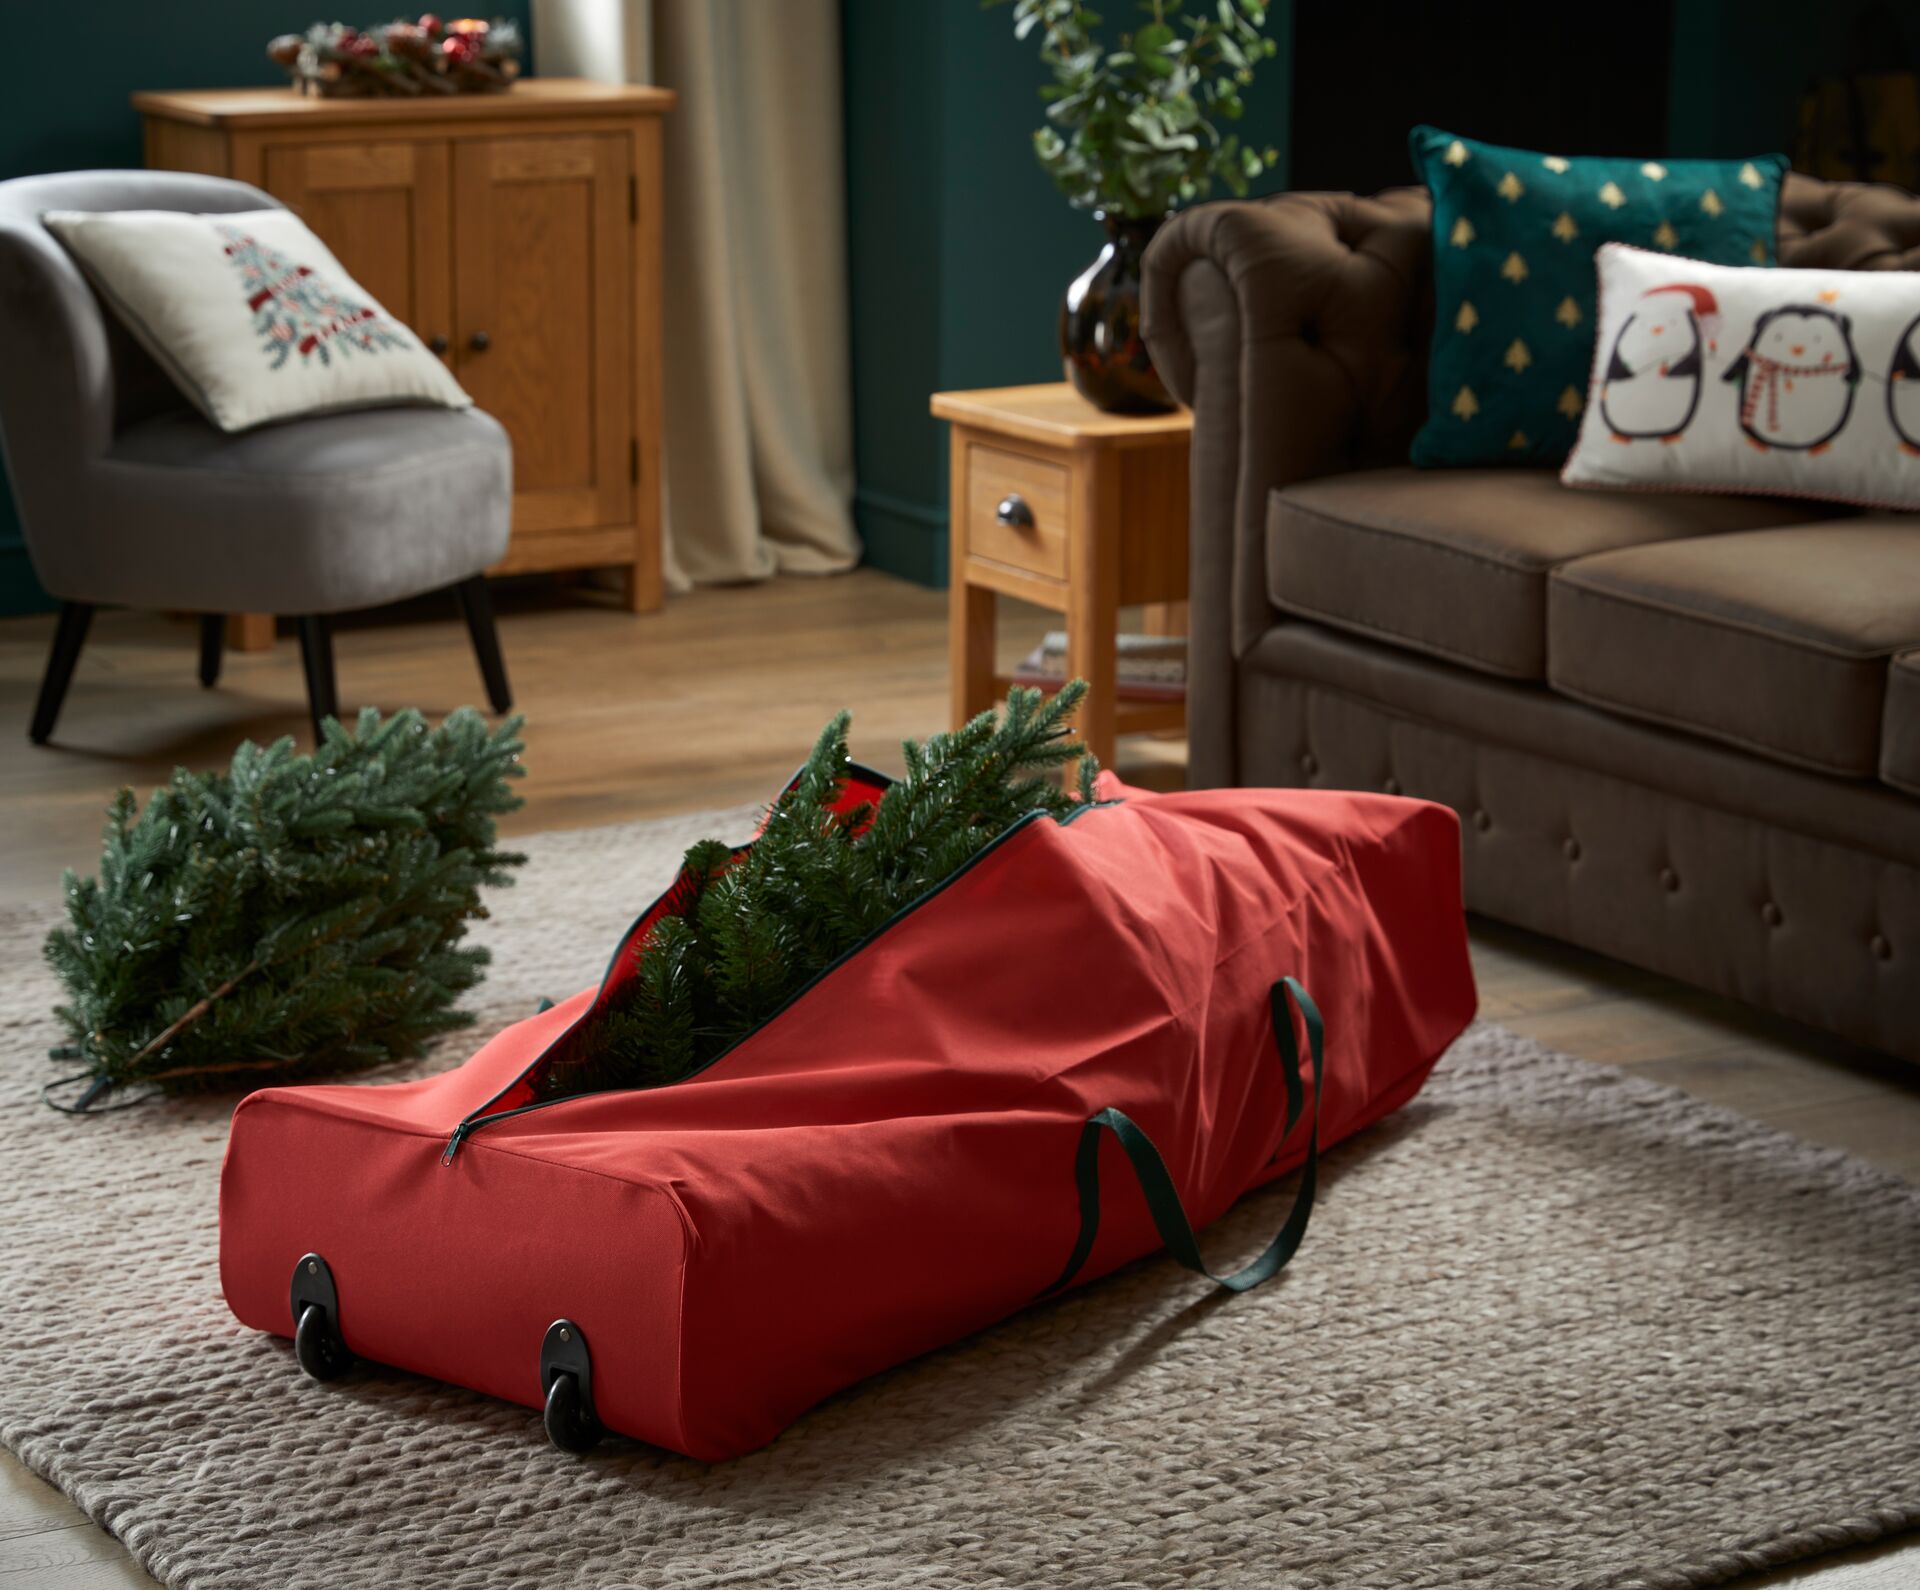 Image of an artificial Christmas Tree in a red storage bag